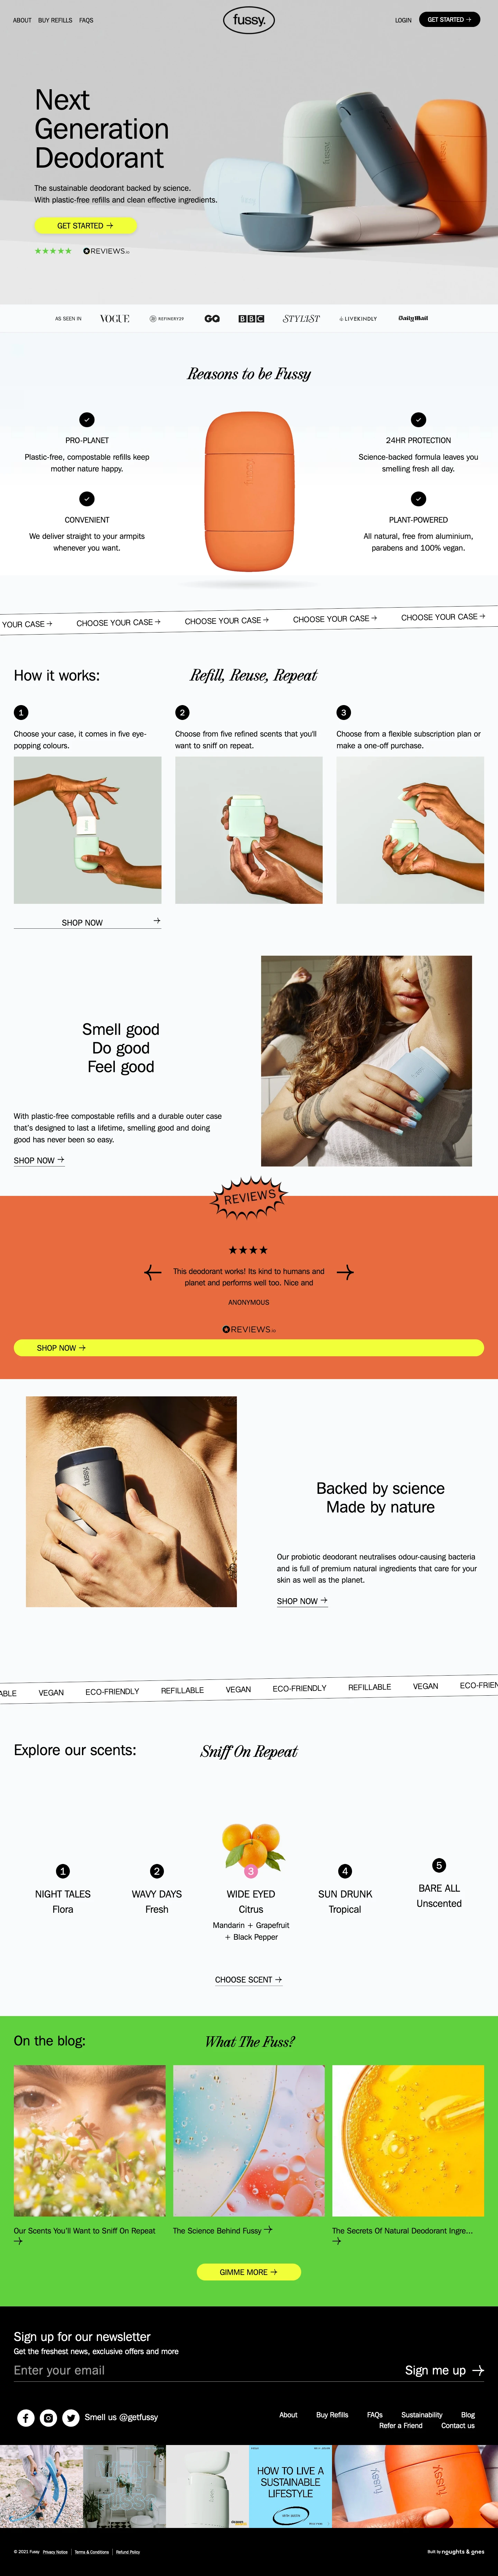 Fussy Landing Page Example: Fussy is the refillable natural deodorant with plastic-free refills and clean effective ingredients. Backed by science it will keep you smelling fresh for over 24 hours.